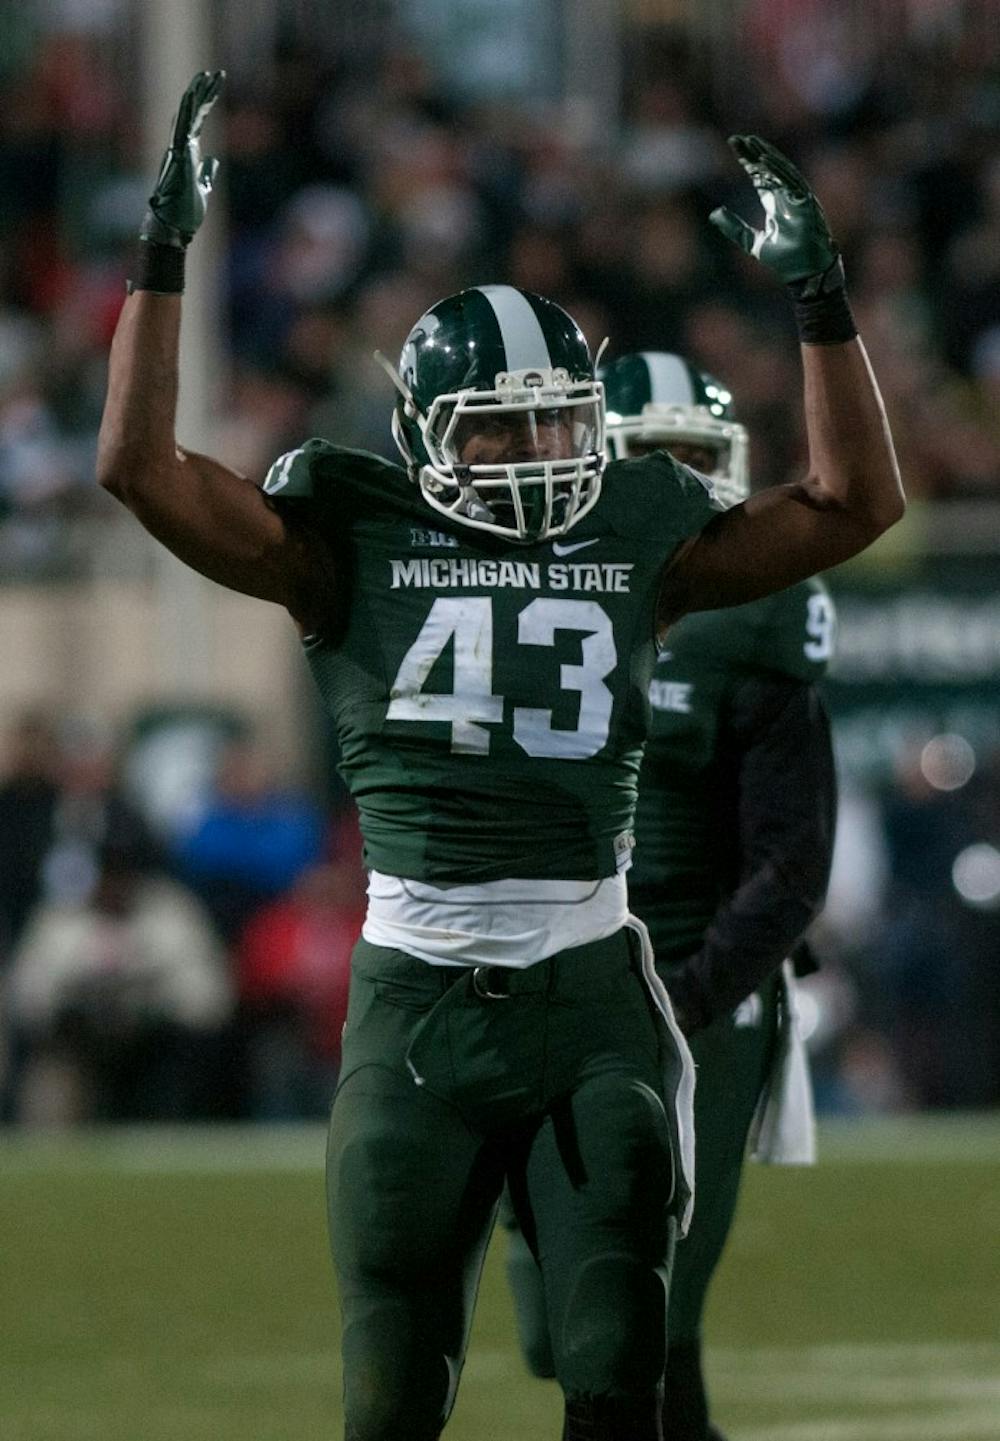 <p>Junior linebacker Ed Davis makes a gesture to get the crowd pumped before a play during the game against Ohio State on Nov. 8, 2014, at Spartan Stadium. The Spartans were defeated by the Buckeyes, 49-37. Raymond Williams/The State News</p>